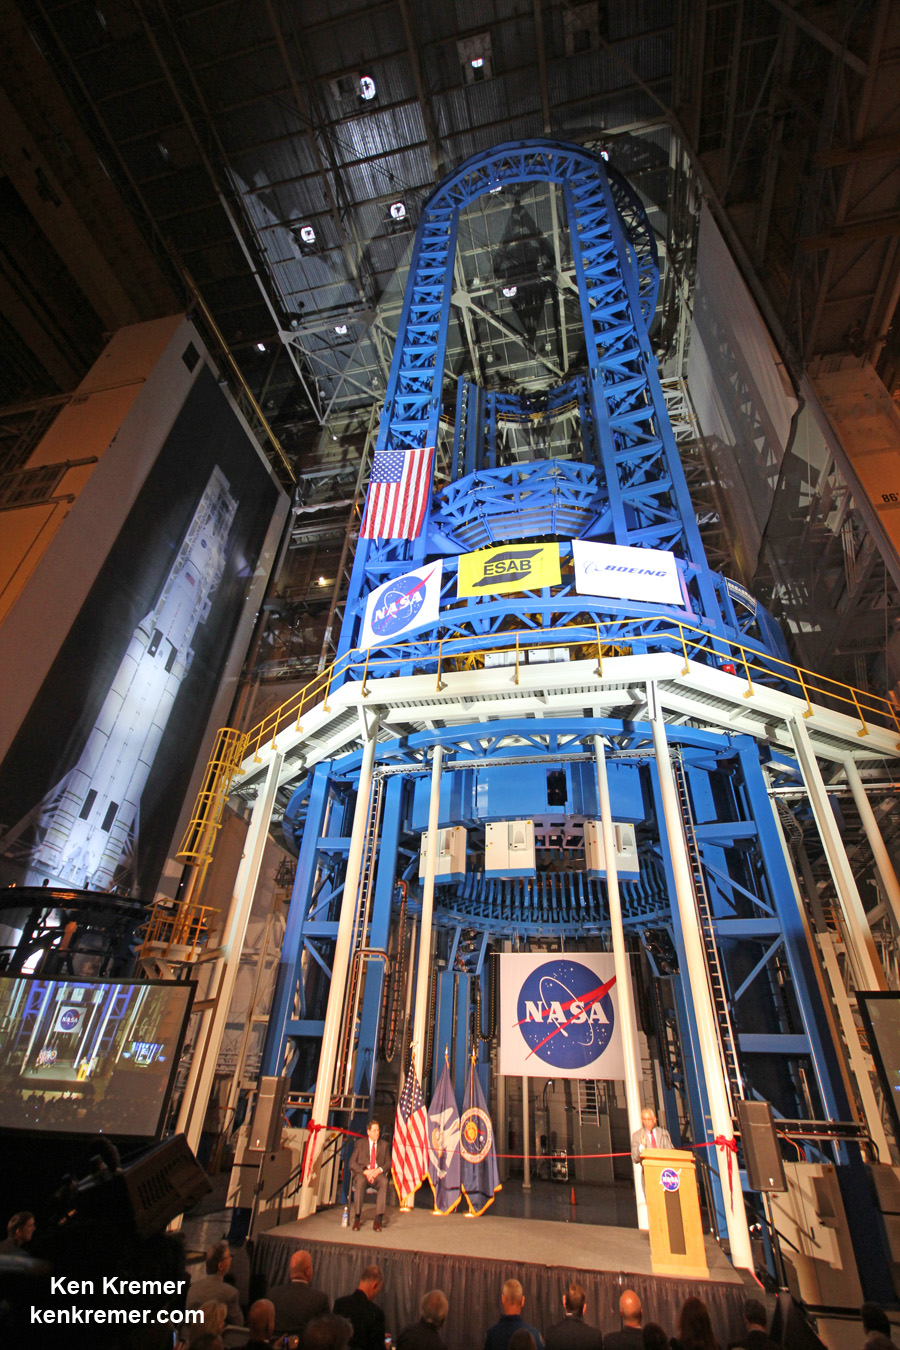 NASA Administrator Charles Bolden officially unveils world’s largest spacecraft welder to begin construction of 1st core stage of NASA's mammoth Space Launch System (SLS) rocket at NASA Michoud Assembly Facility, New Orleans, on Sept. 12, 2014. SLS will be the most powerful rocket ever built by humans.  Credit: Ken Kremer - kenkremer.com